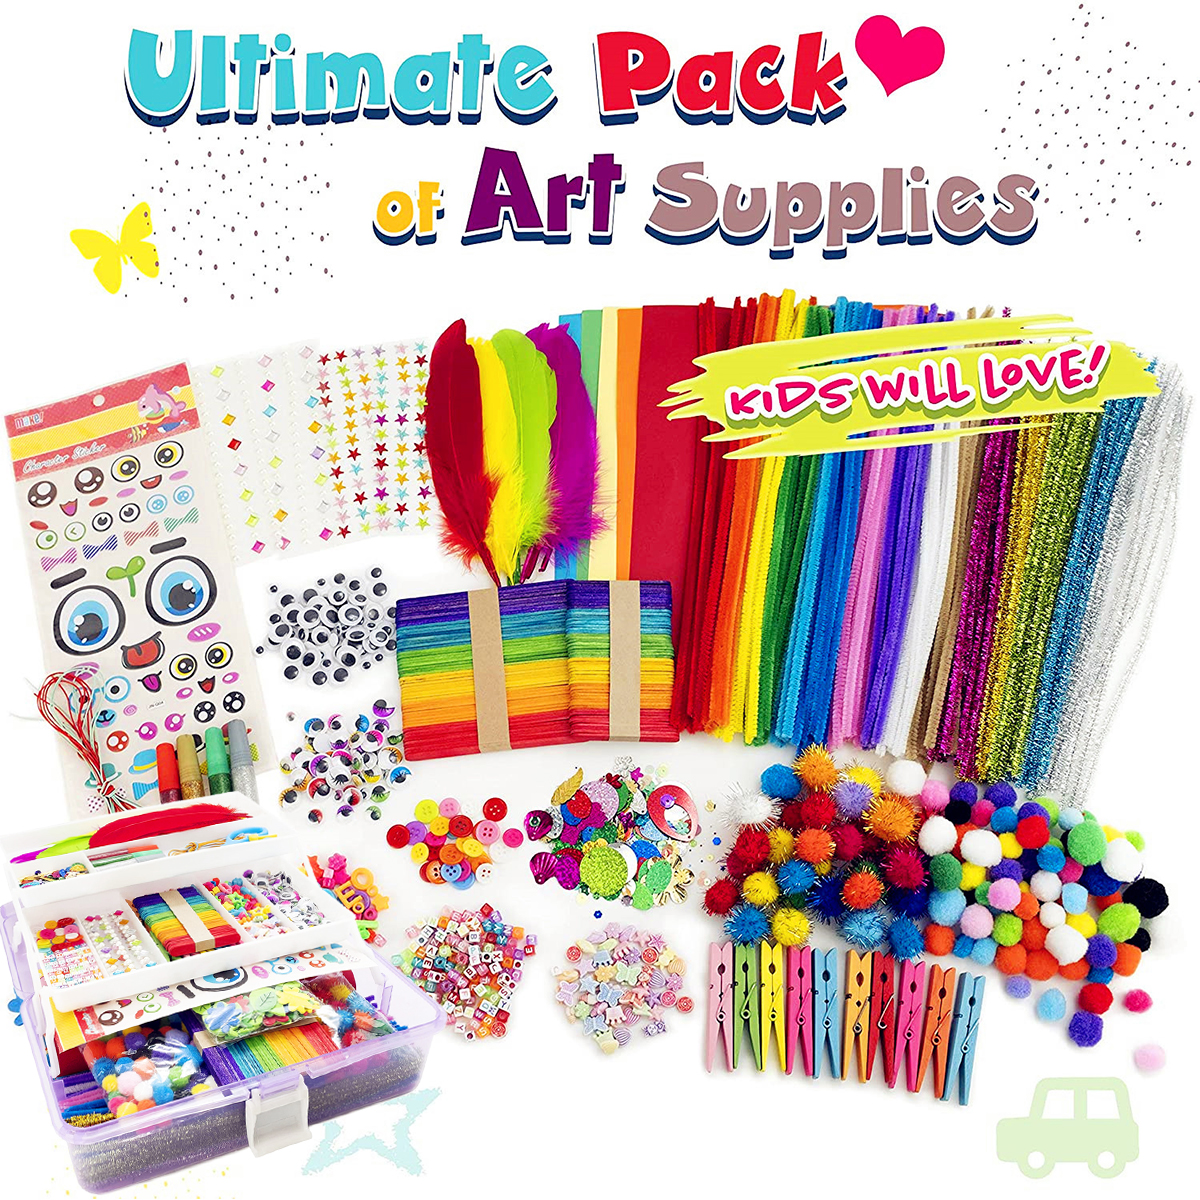 Pluokvzr Arts and Crafts Supplies for Kids Craft Art Supply Kit for Toddlers Over 1000 Pcs DIY Art Craft Sets Supplies Included Pipe Cleaners Pompoms